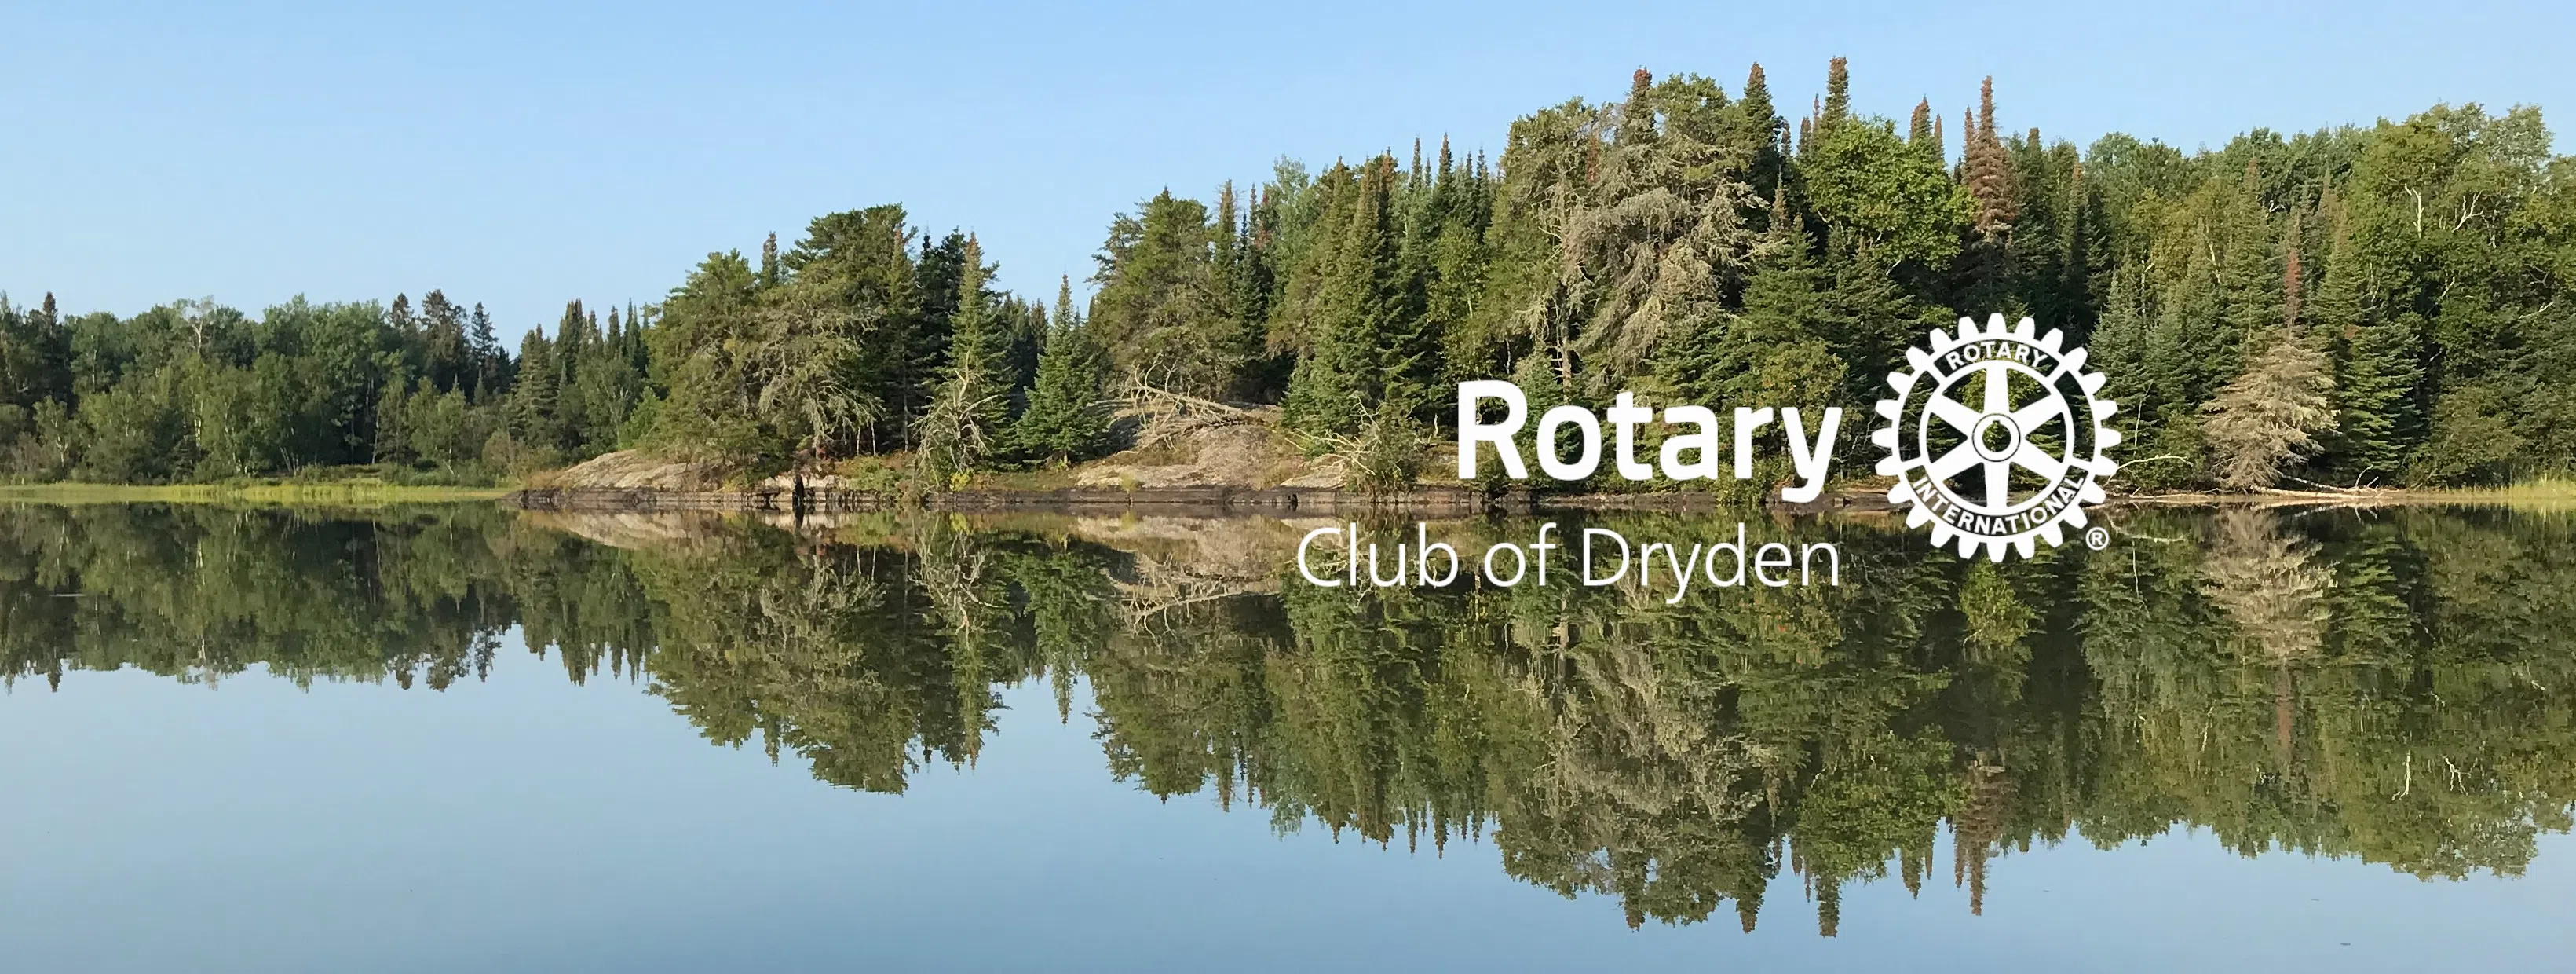 Rotary Club Of Dryden